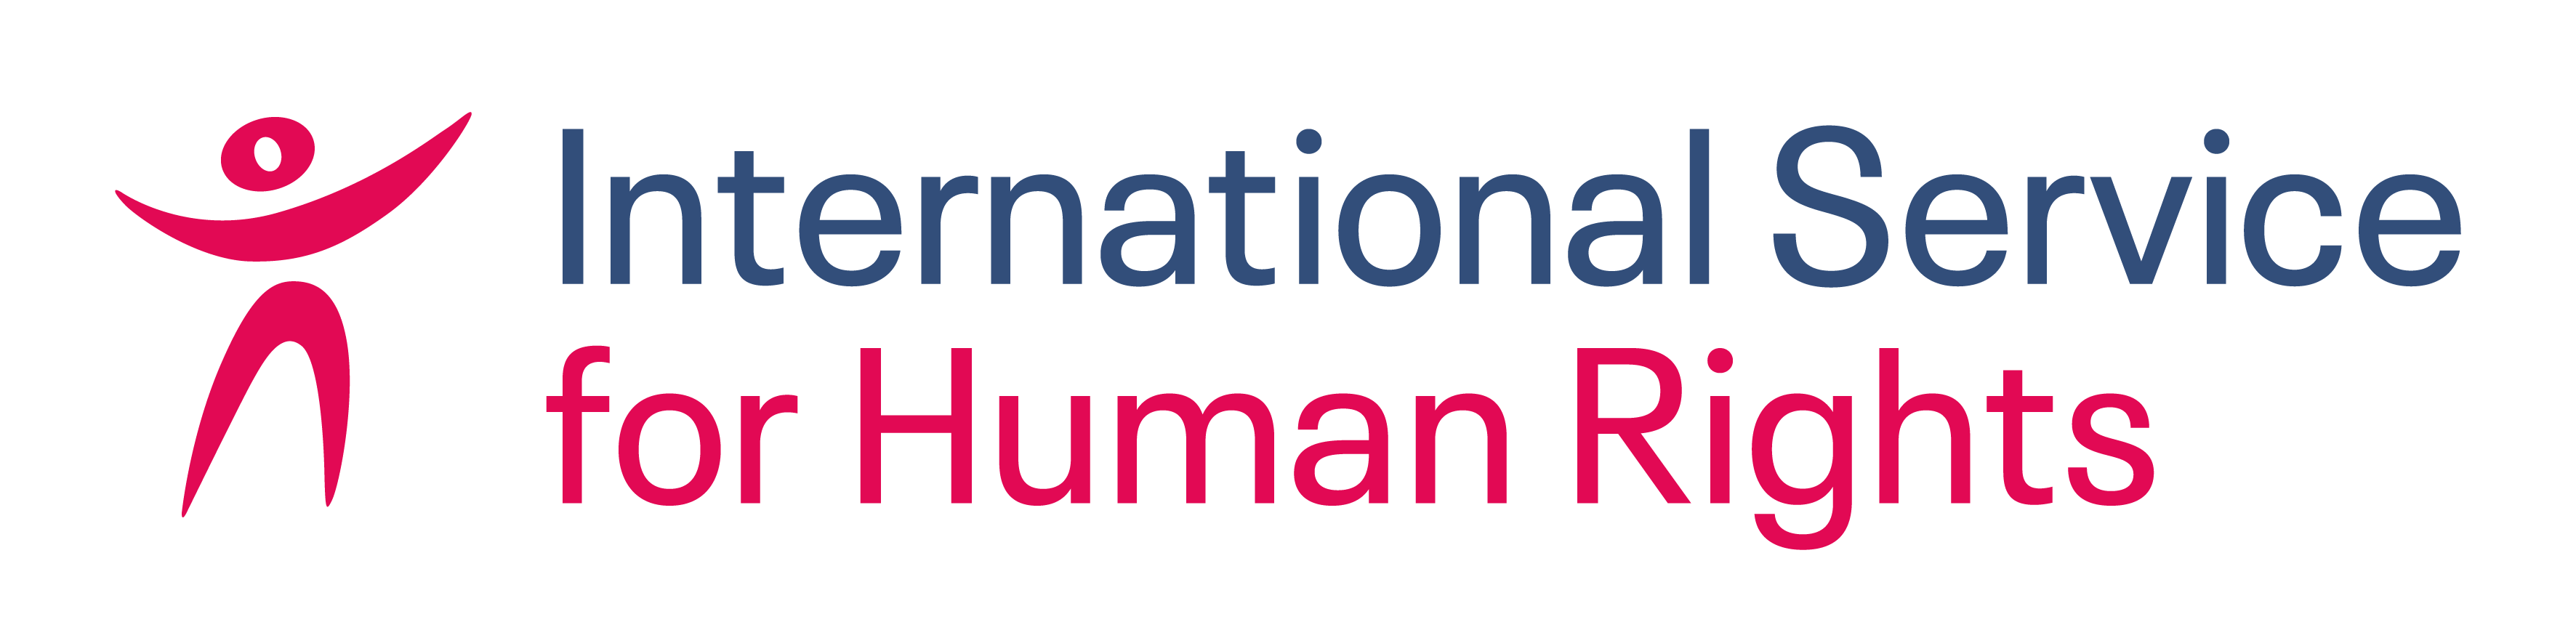 International Service for Human Rights | World Benchmarking Alliance